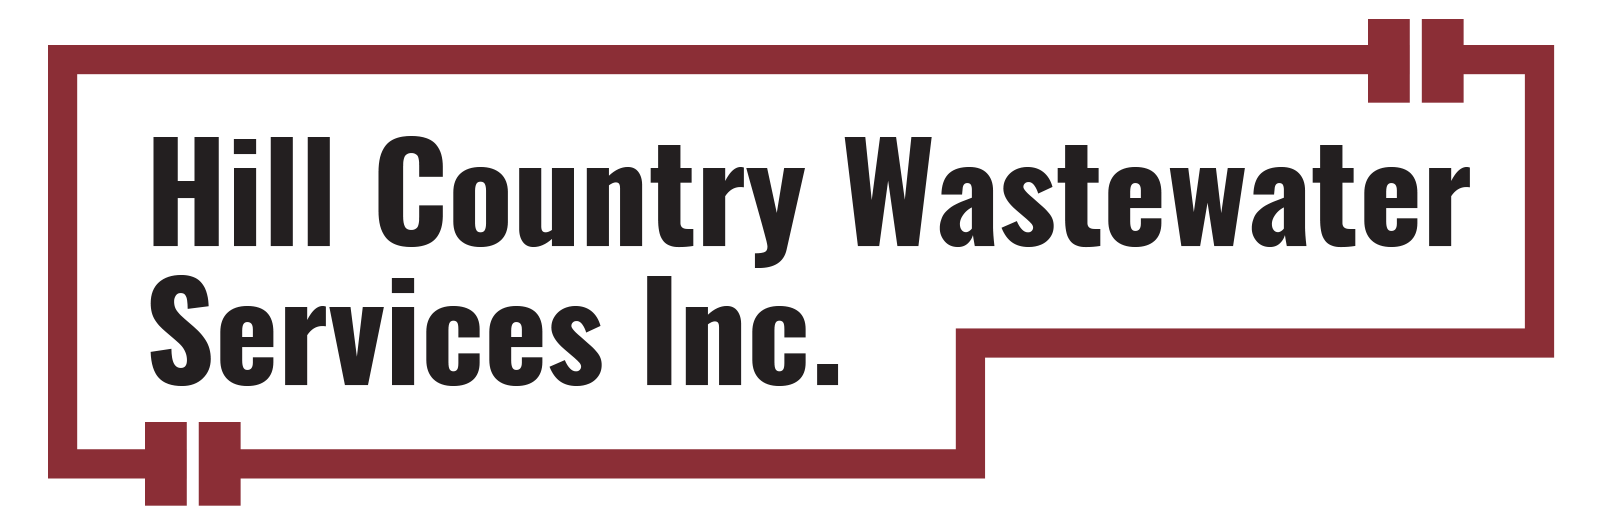 Hill Country Wastewater Services Inc.